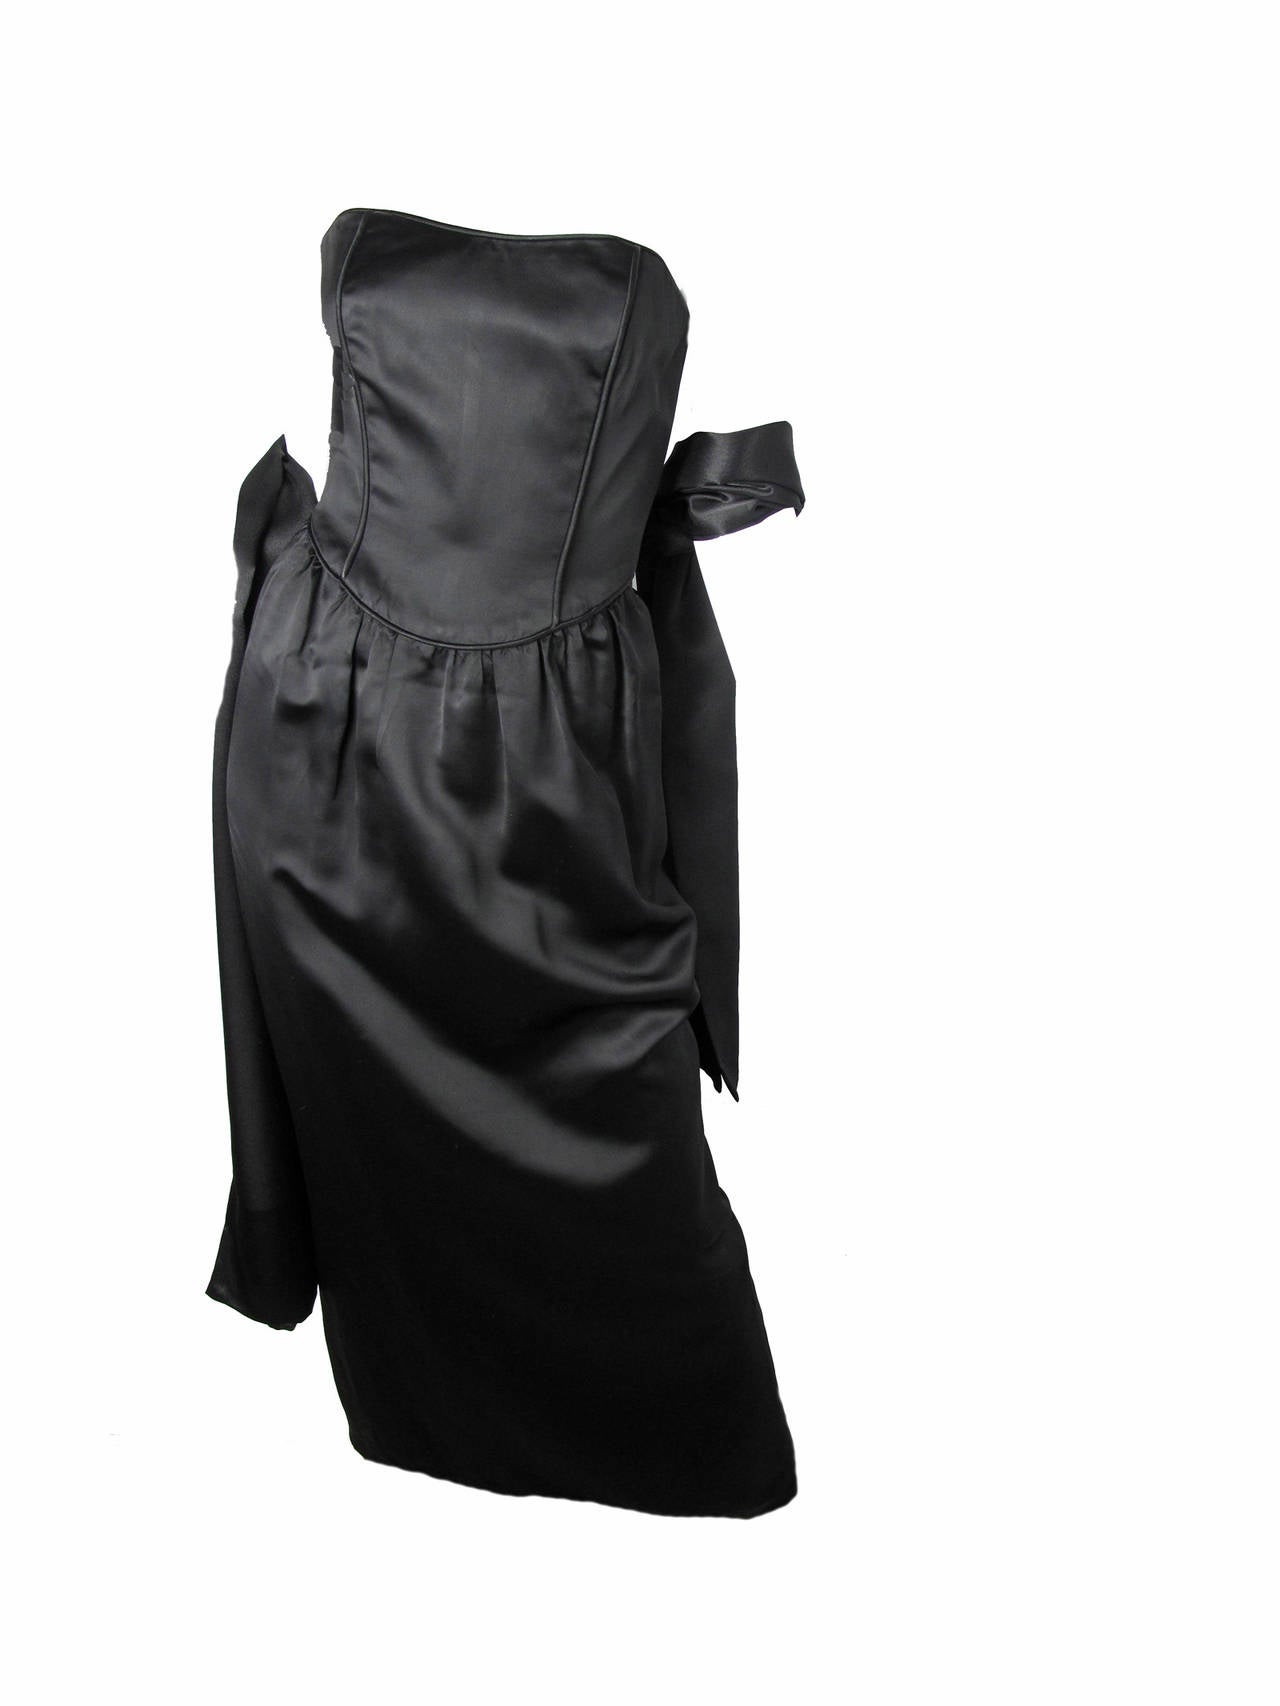 Black Roland Klein black strapless dress with black and white striped train  For Sale